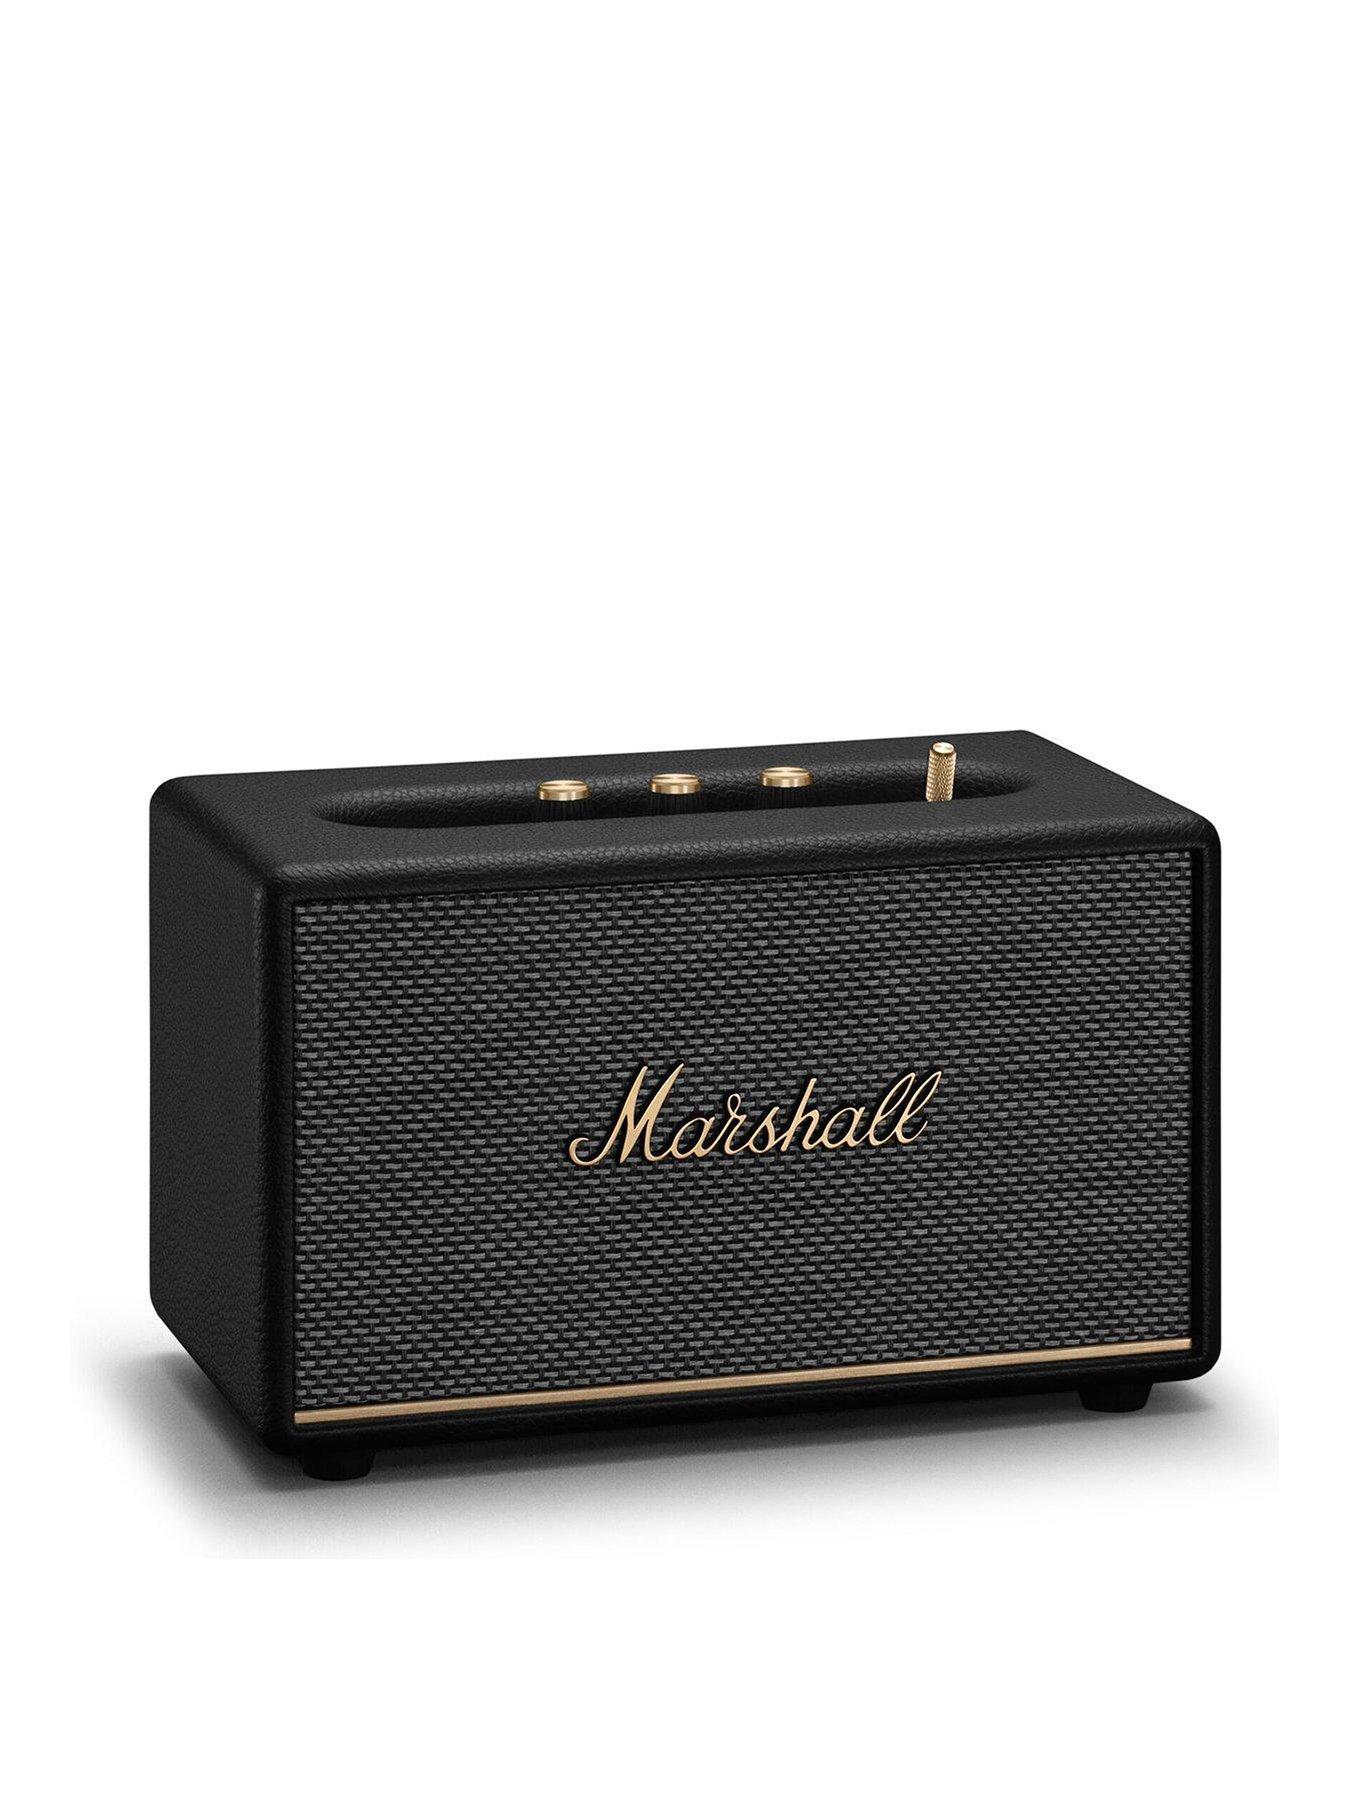 Marshall Woburn II Bluetooth speaker lets you customize the sound via the  app or analogs » Gadget Flow